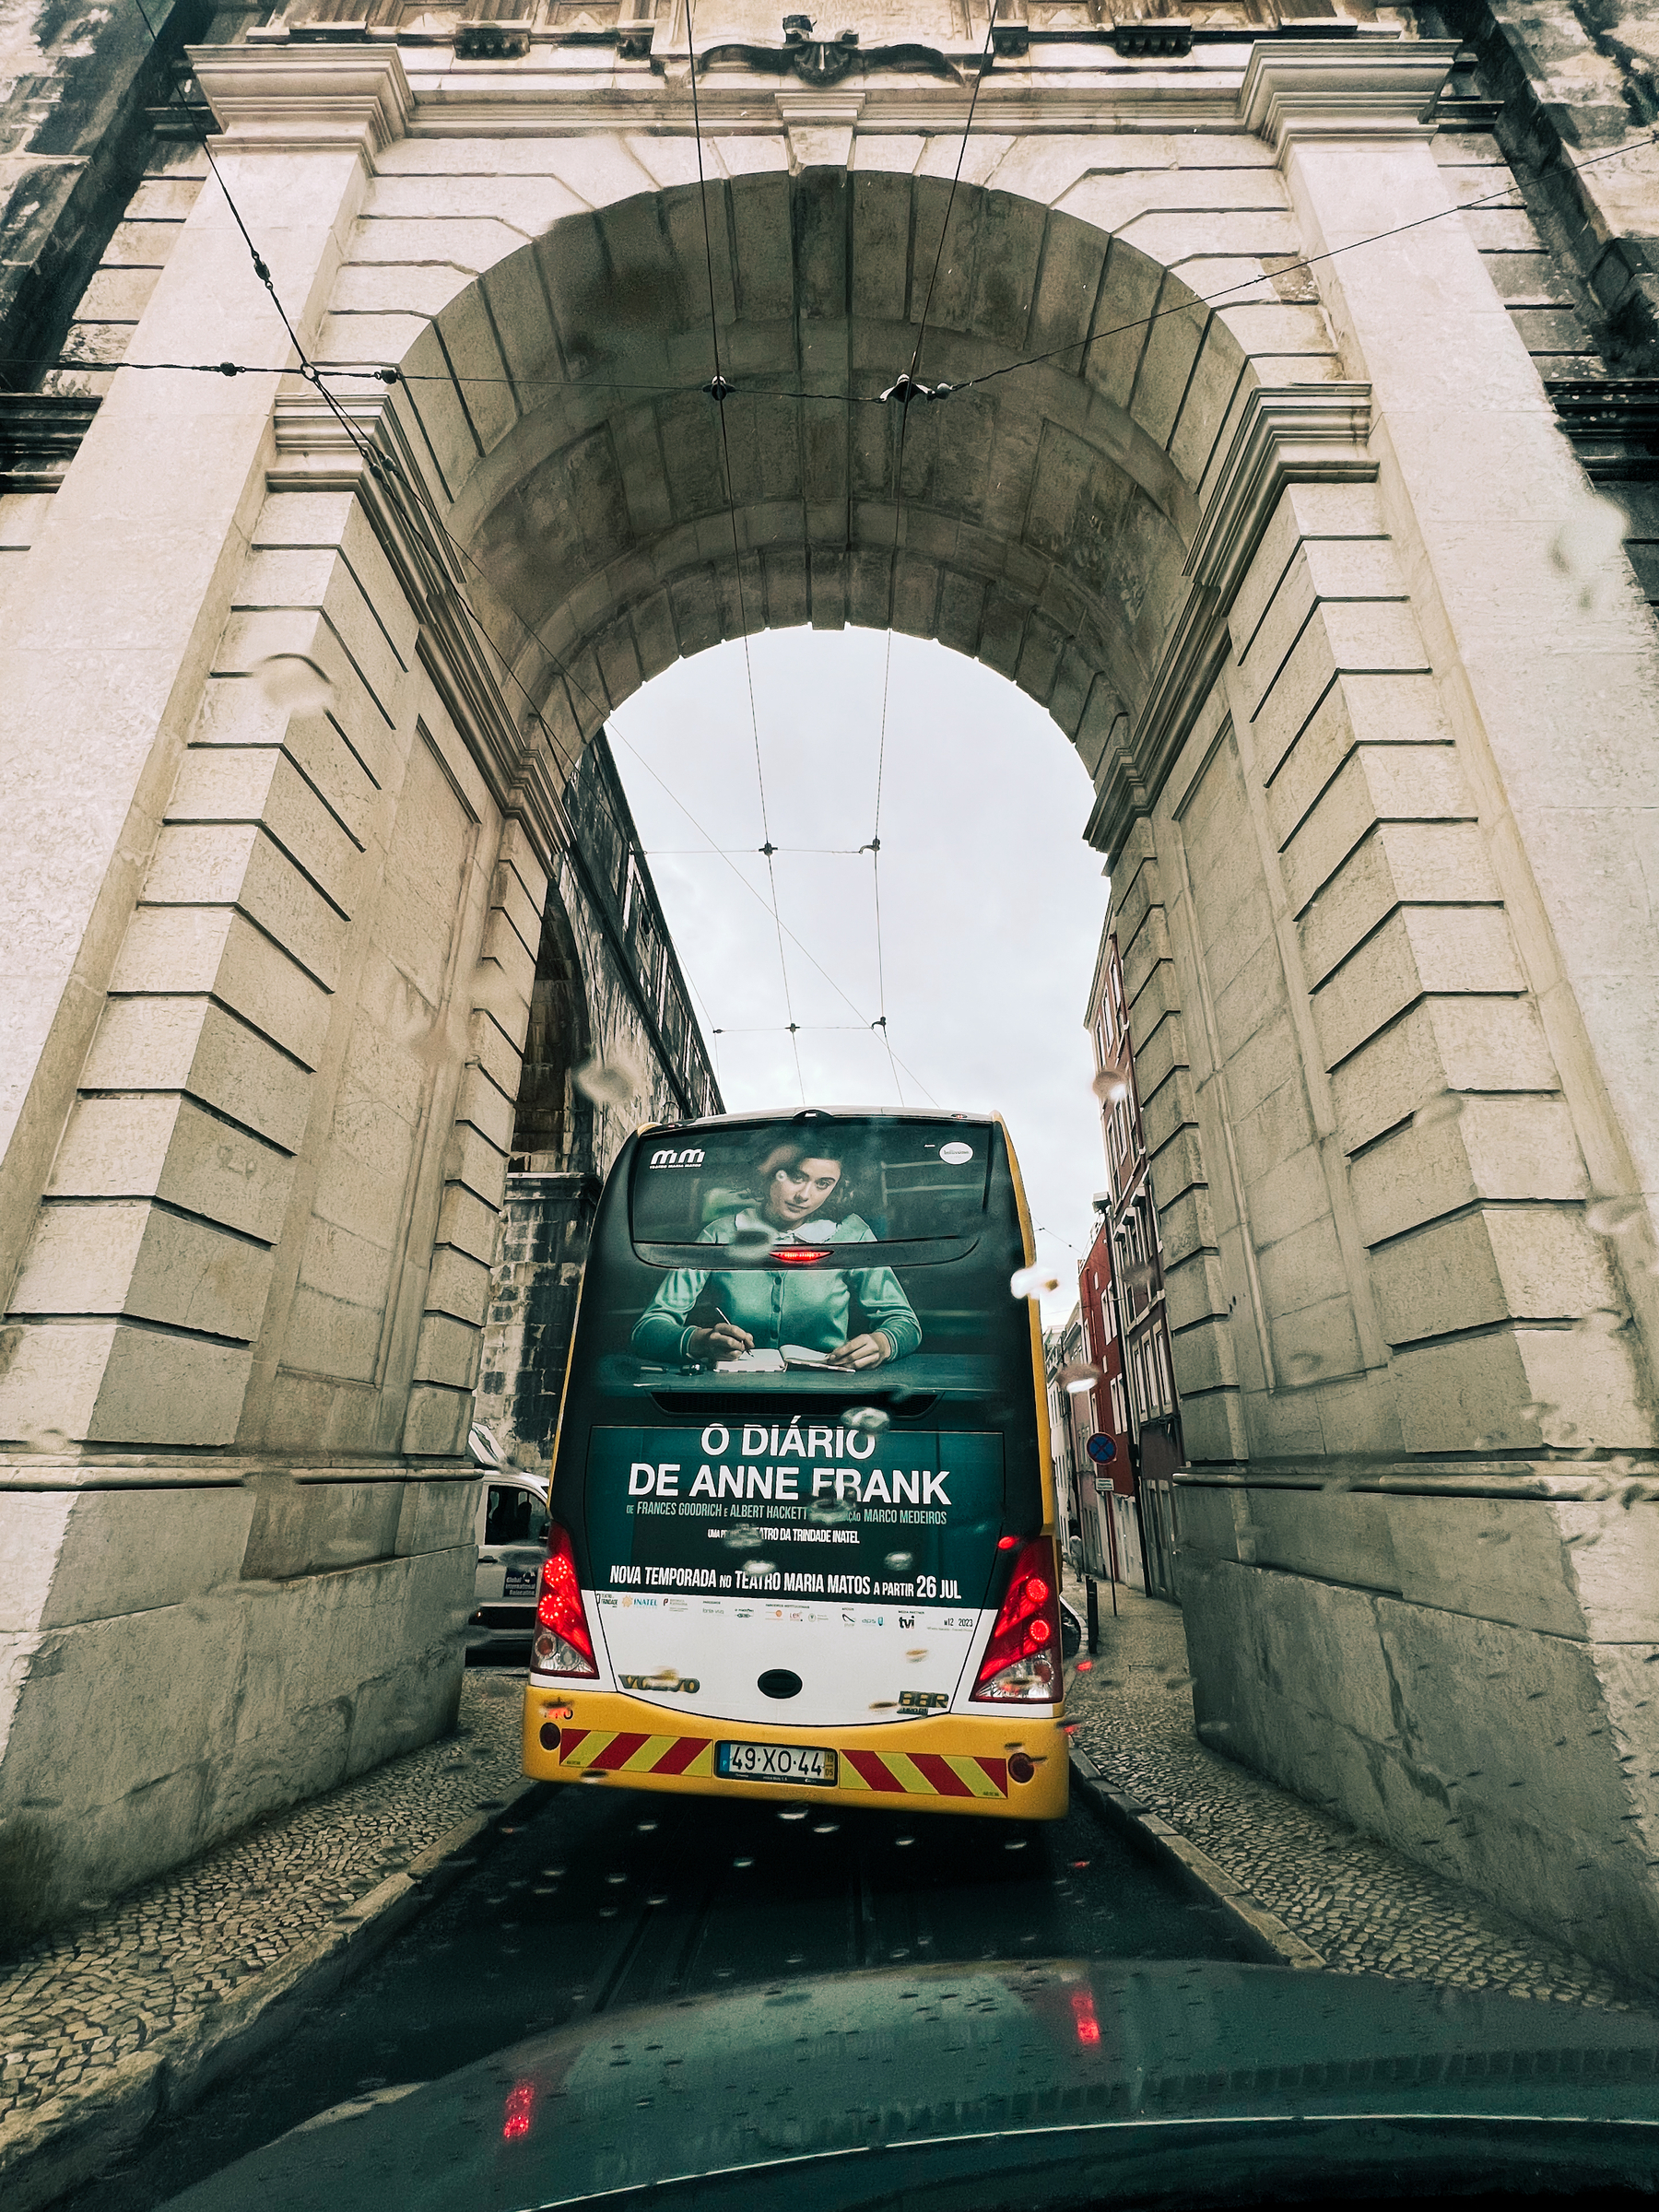 A bus is stopped under an aqueduct arch. There’s an ad for a theater play, “Diary of Anne Frank”. It’s raining. 